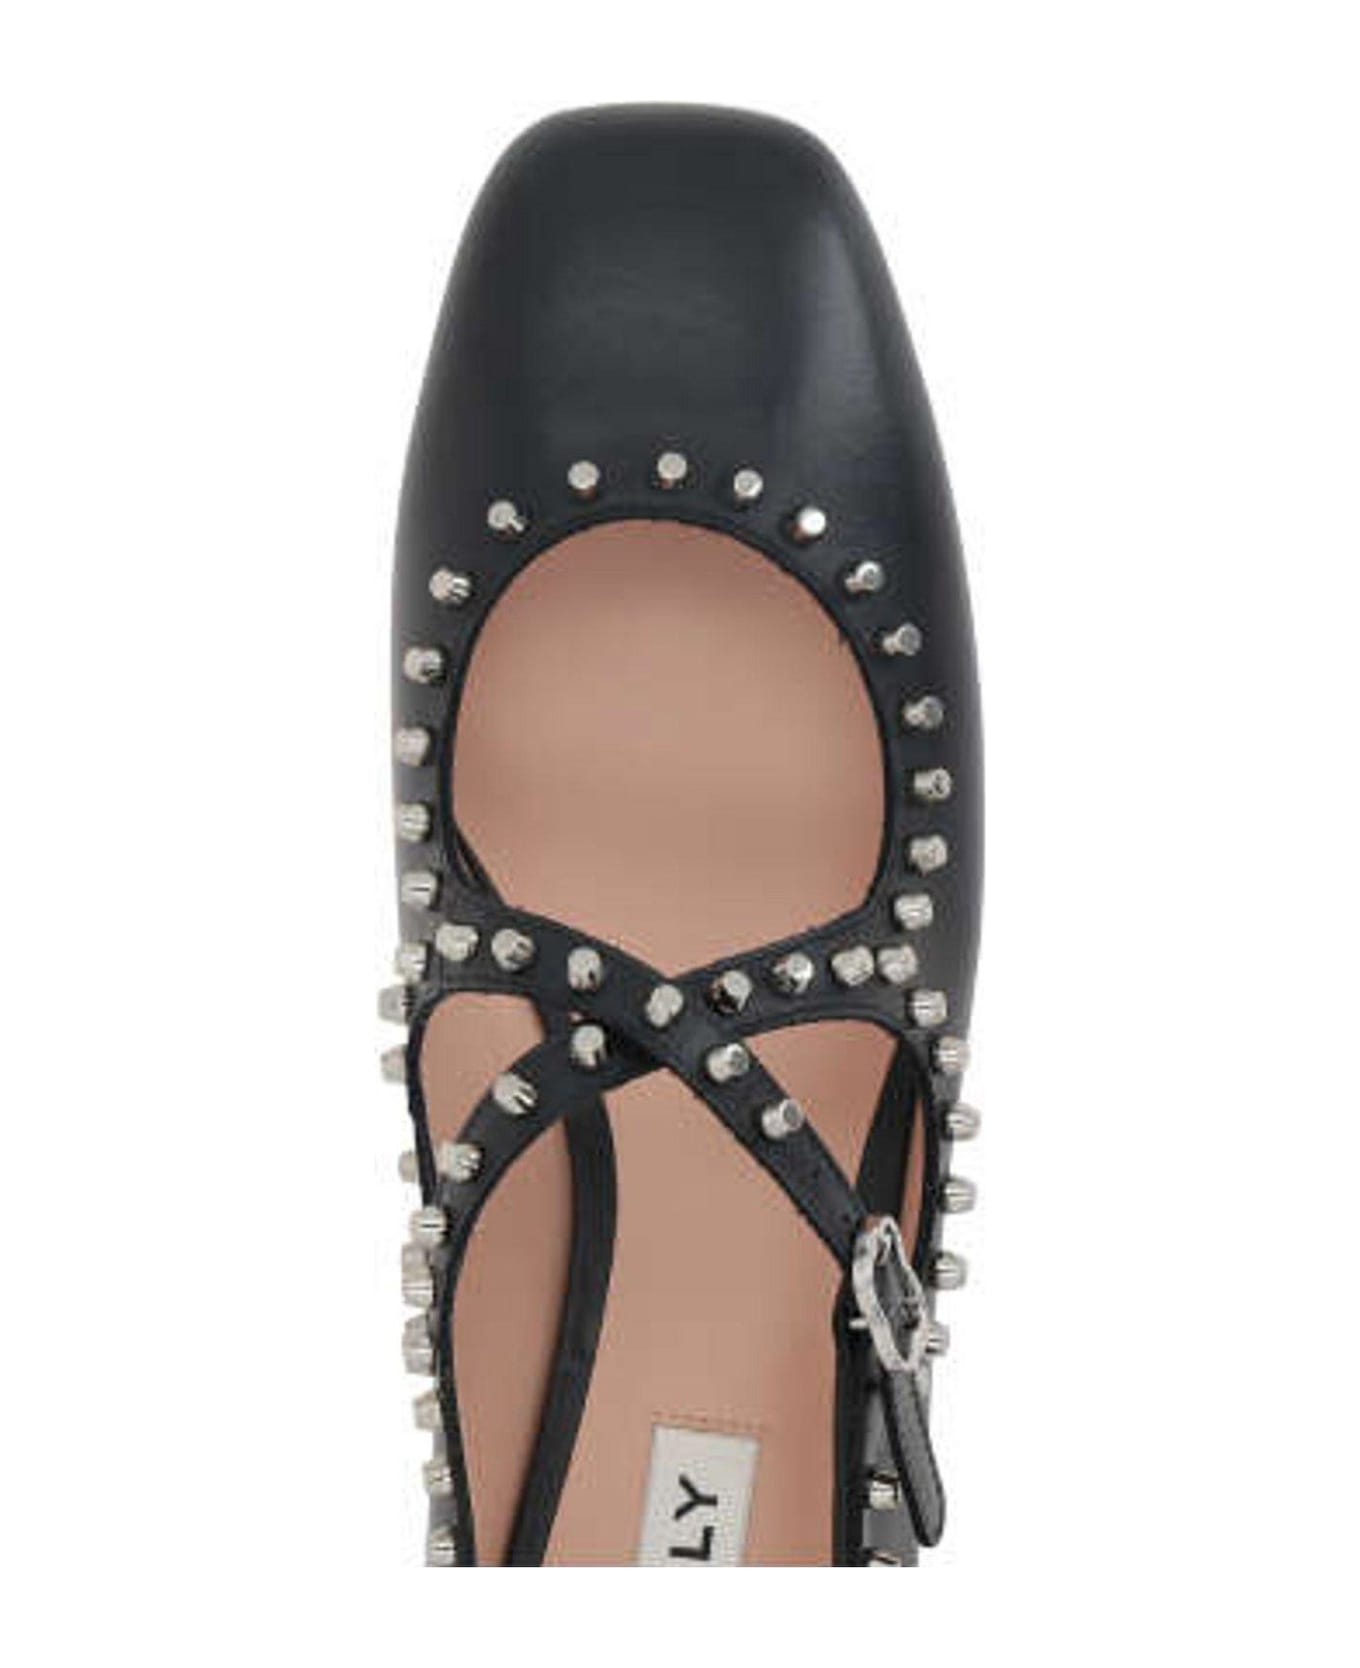 Bally Stud-detailed Flat Shoes - Black